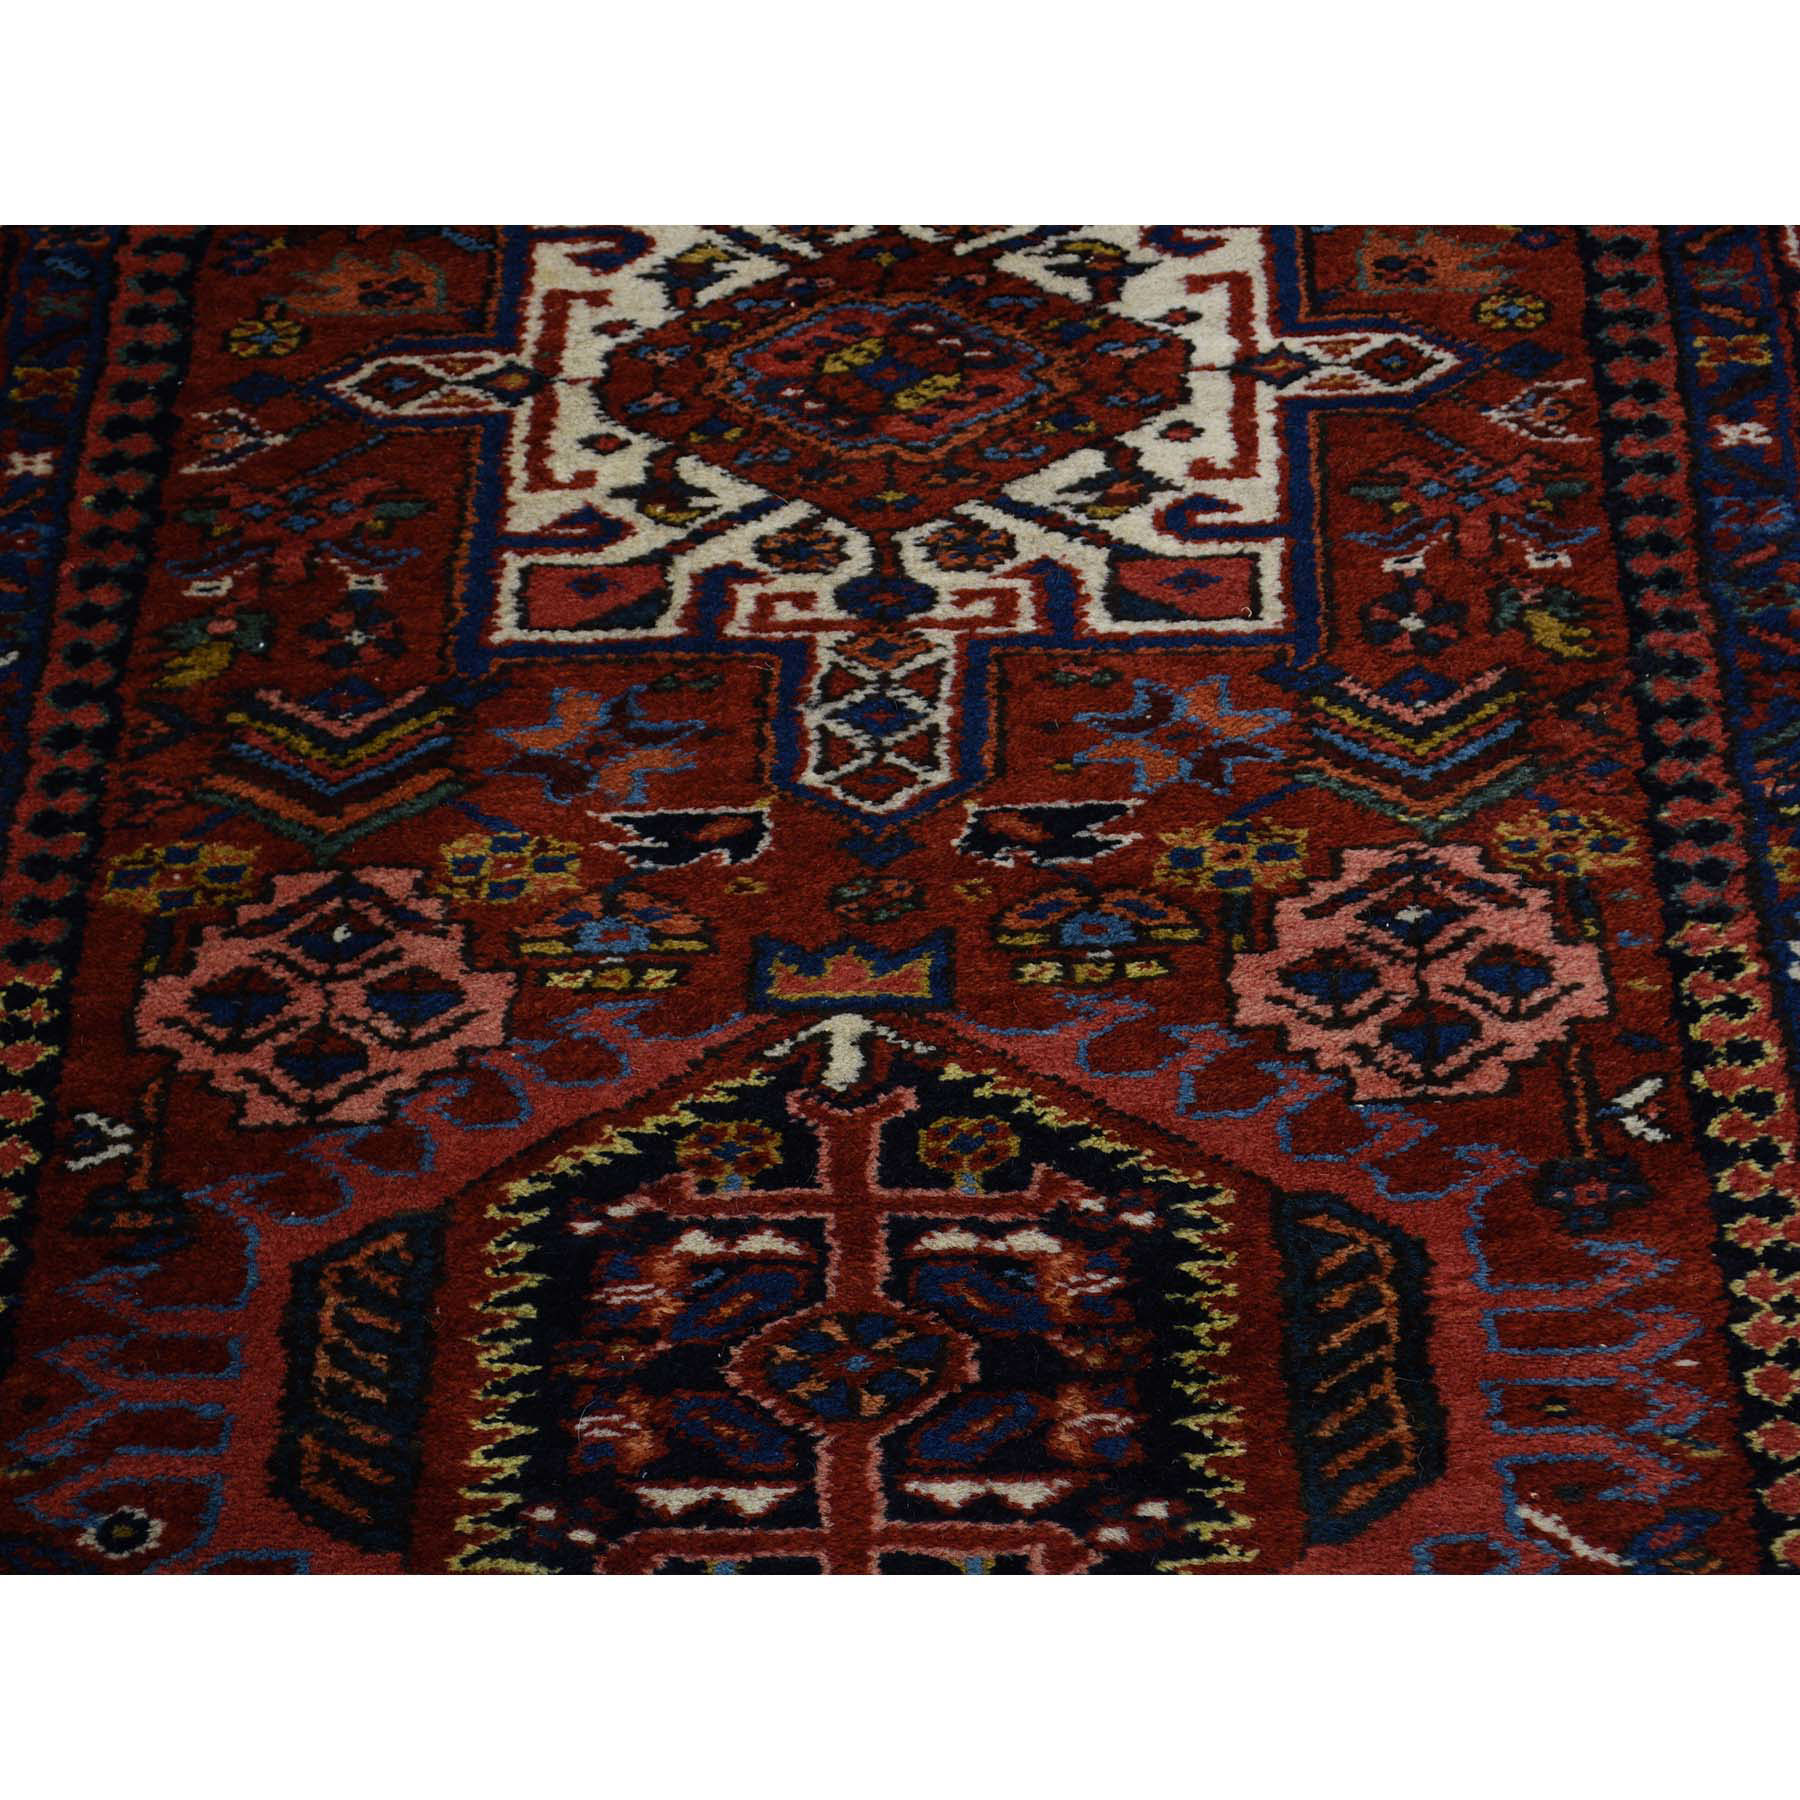 3-7 x17-4  Gallery Size Antique Persian Karajeh Excellent Condition Rug 